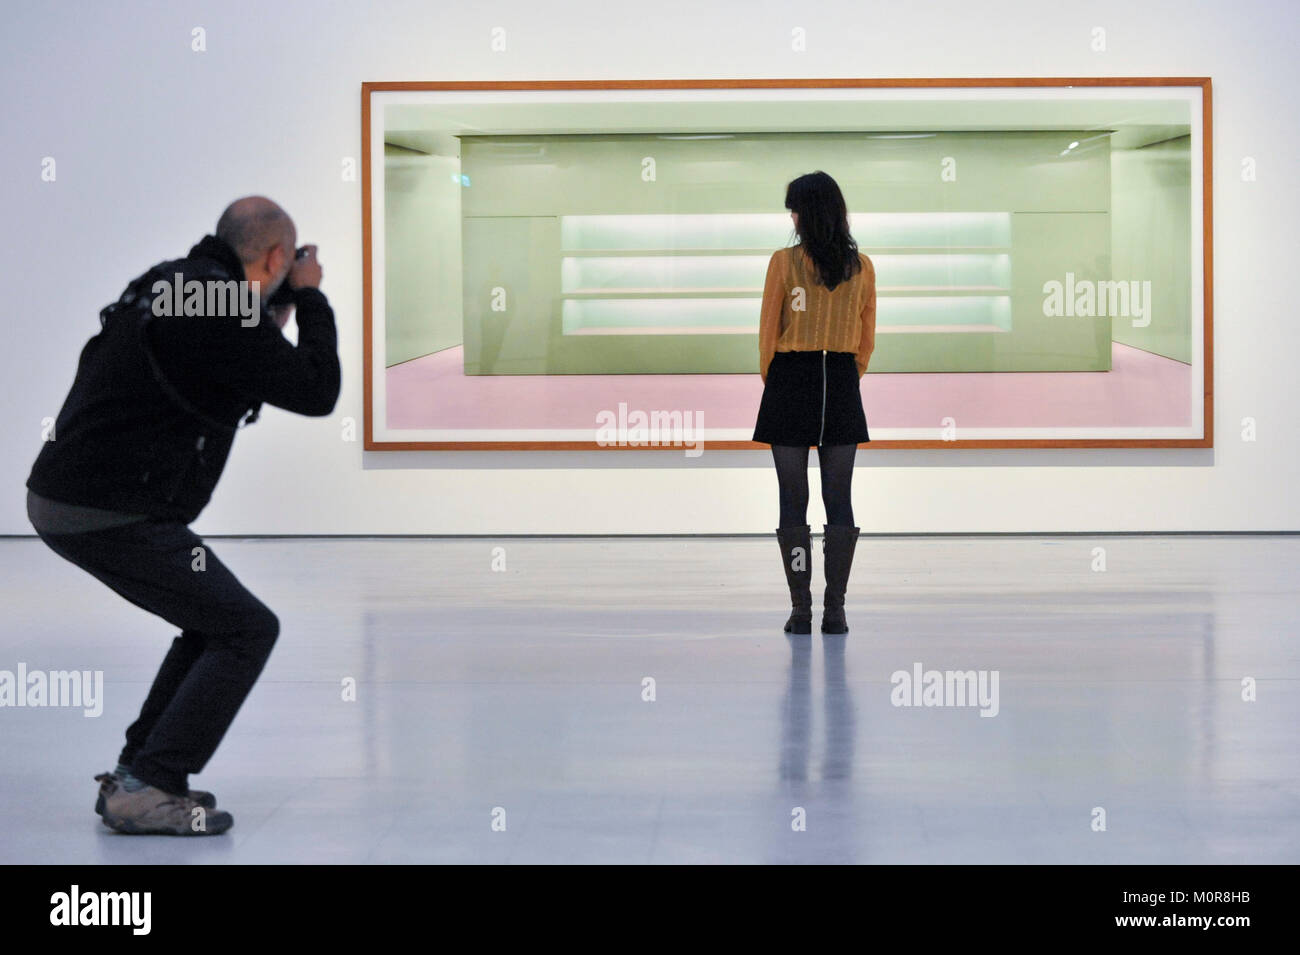 London, UK. 24 January 2018. A staff member views "Prada II", 1997, by  Andreas Gursky. Preview of "Andreas Gursky", the first major UK  retrospective by the acclaimed German photographer at the newly